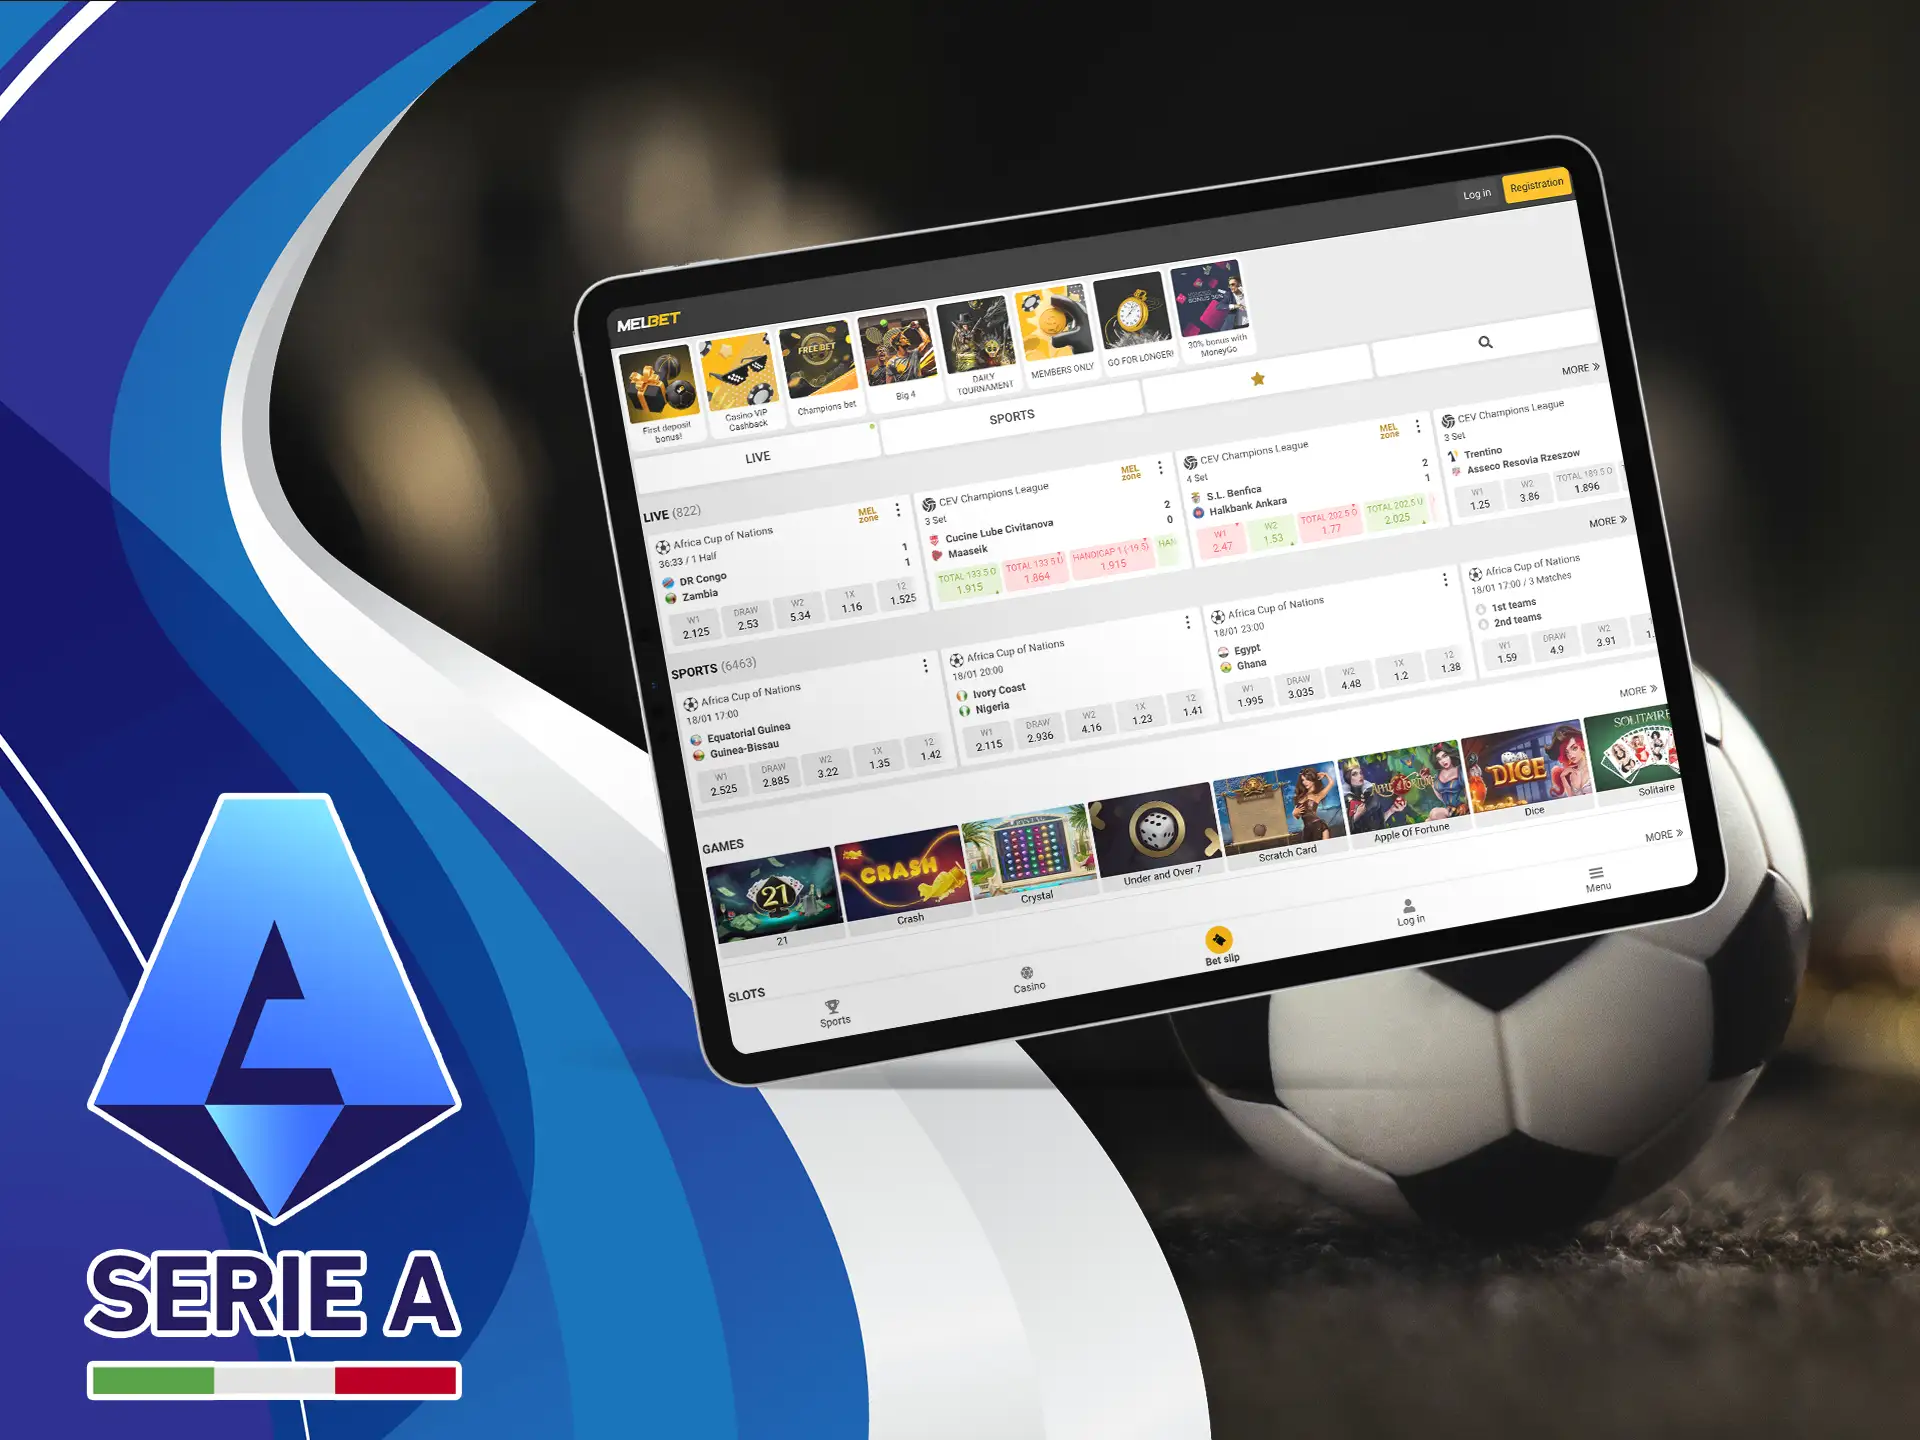 Almost all gaming platforms provide the opportunity to place bets on this league famous Inter, Juventus, Milan.